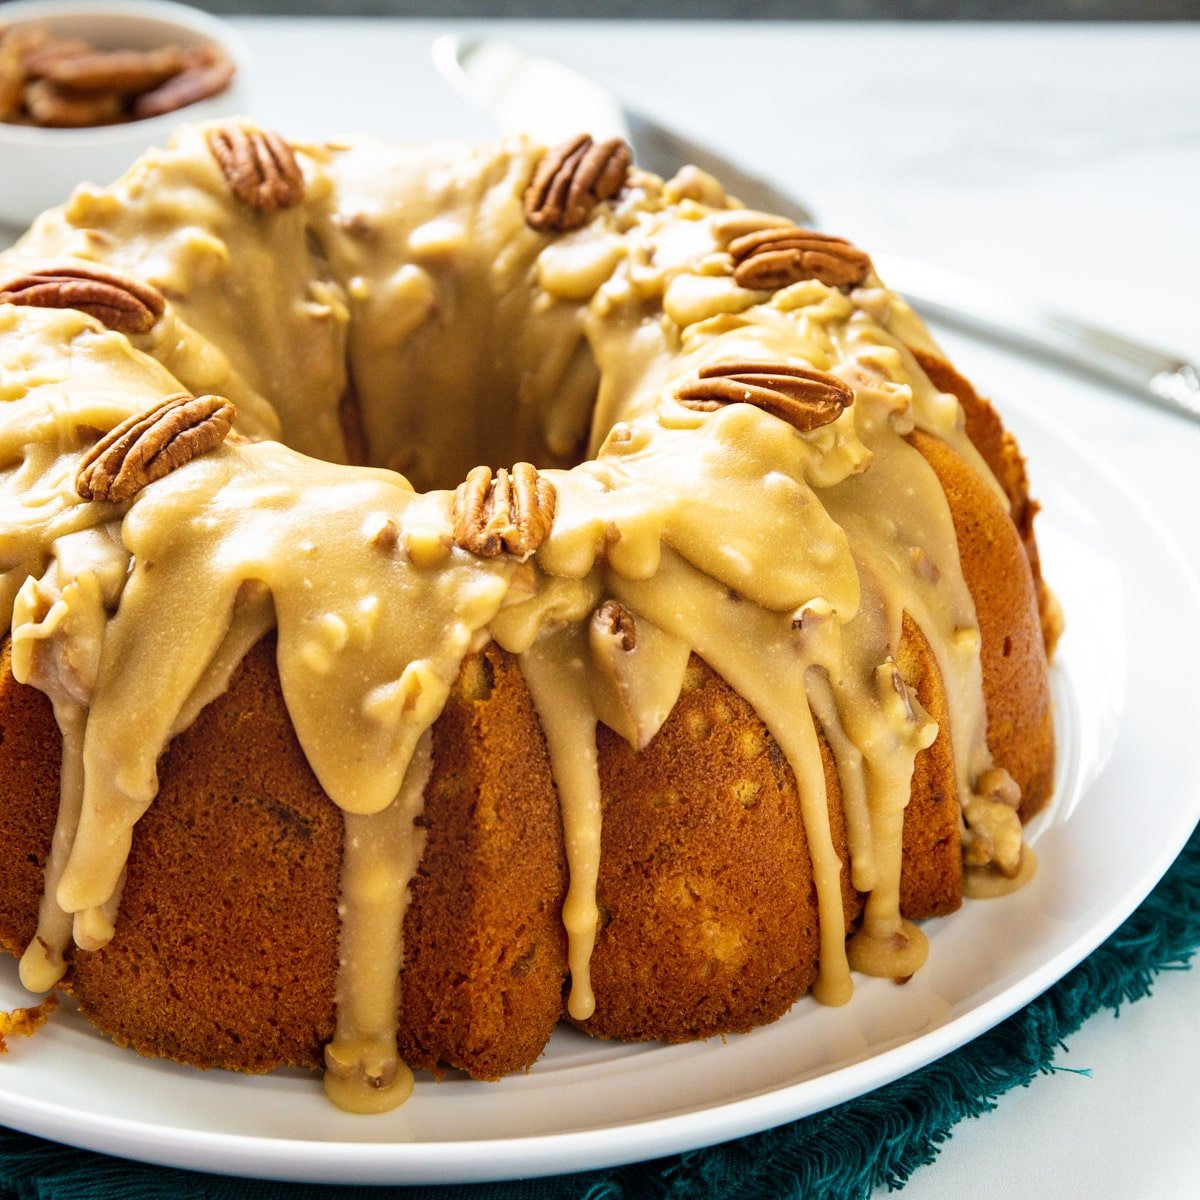 Southern Praline Bundt Cake topped with glaze and pecans.